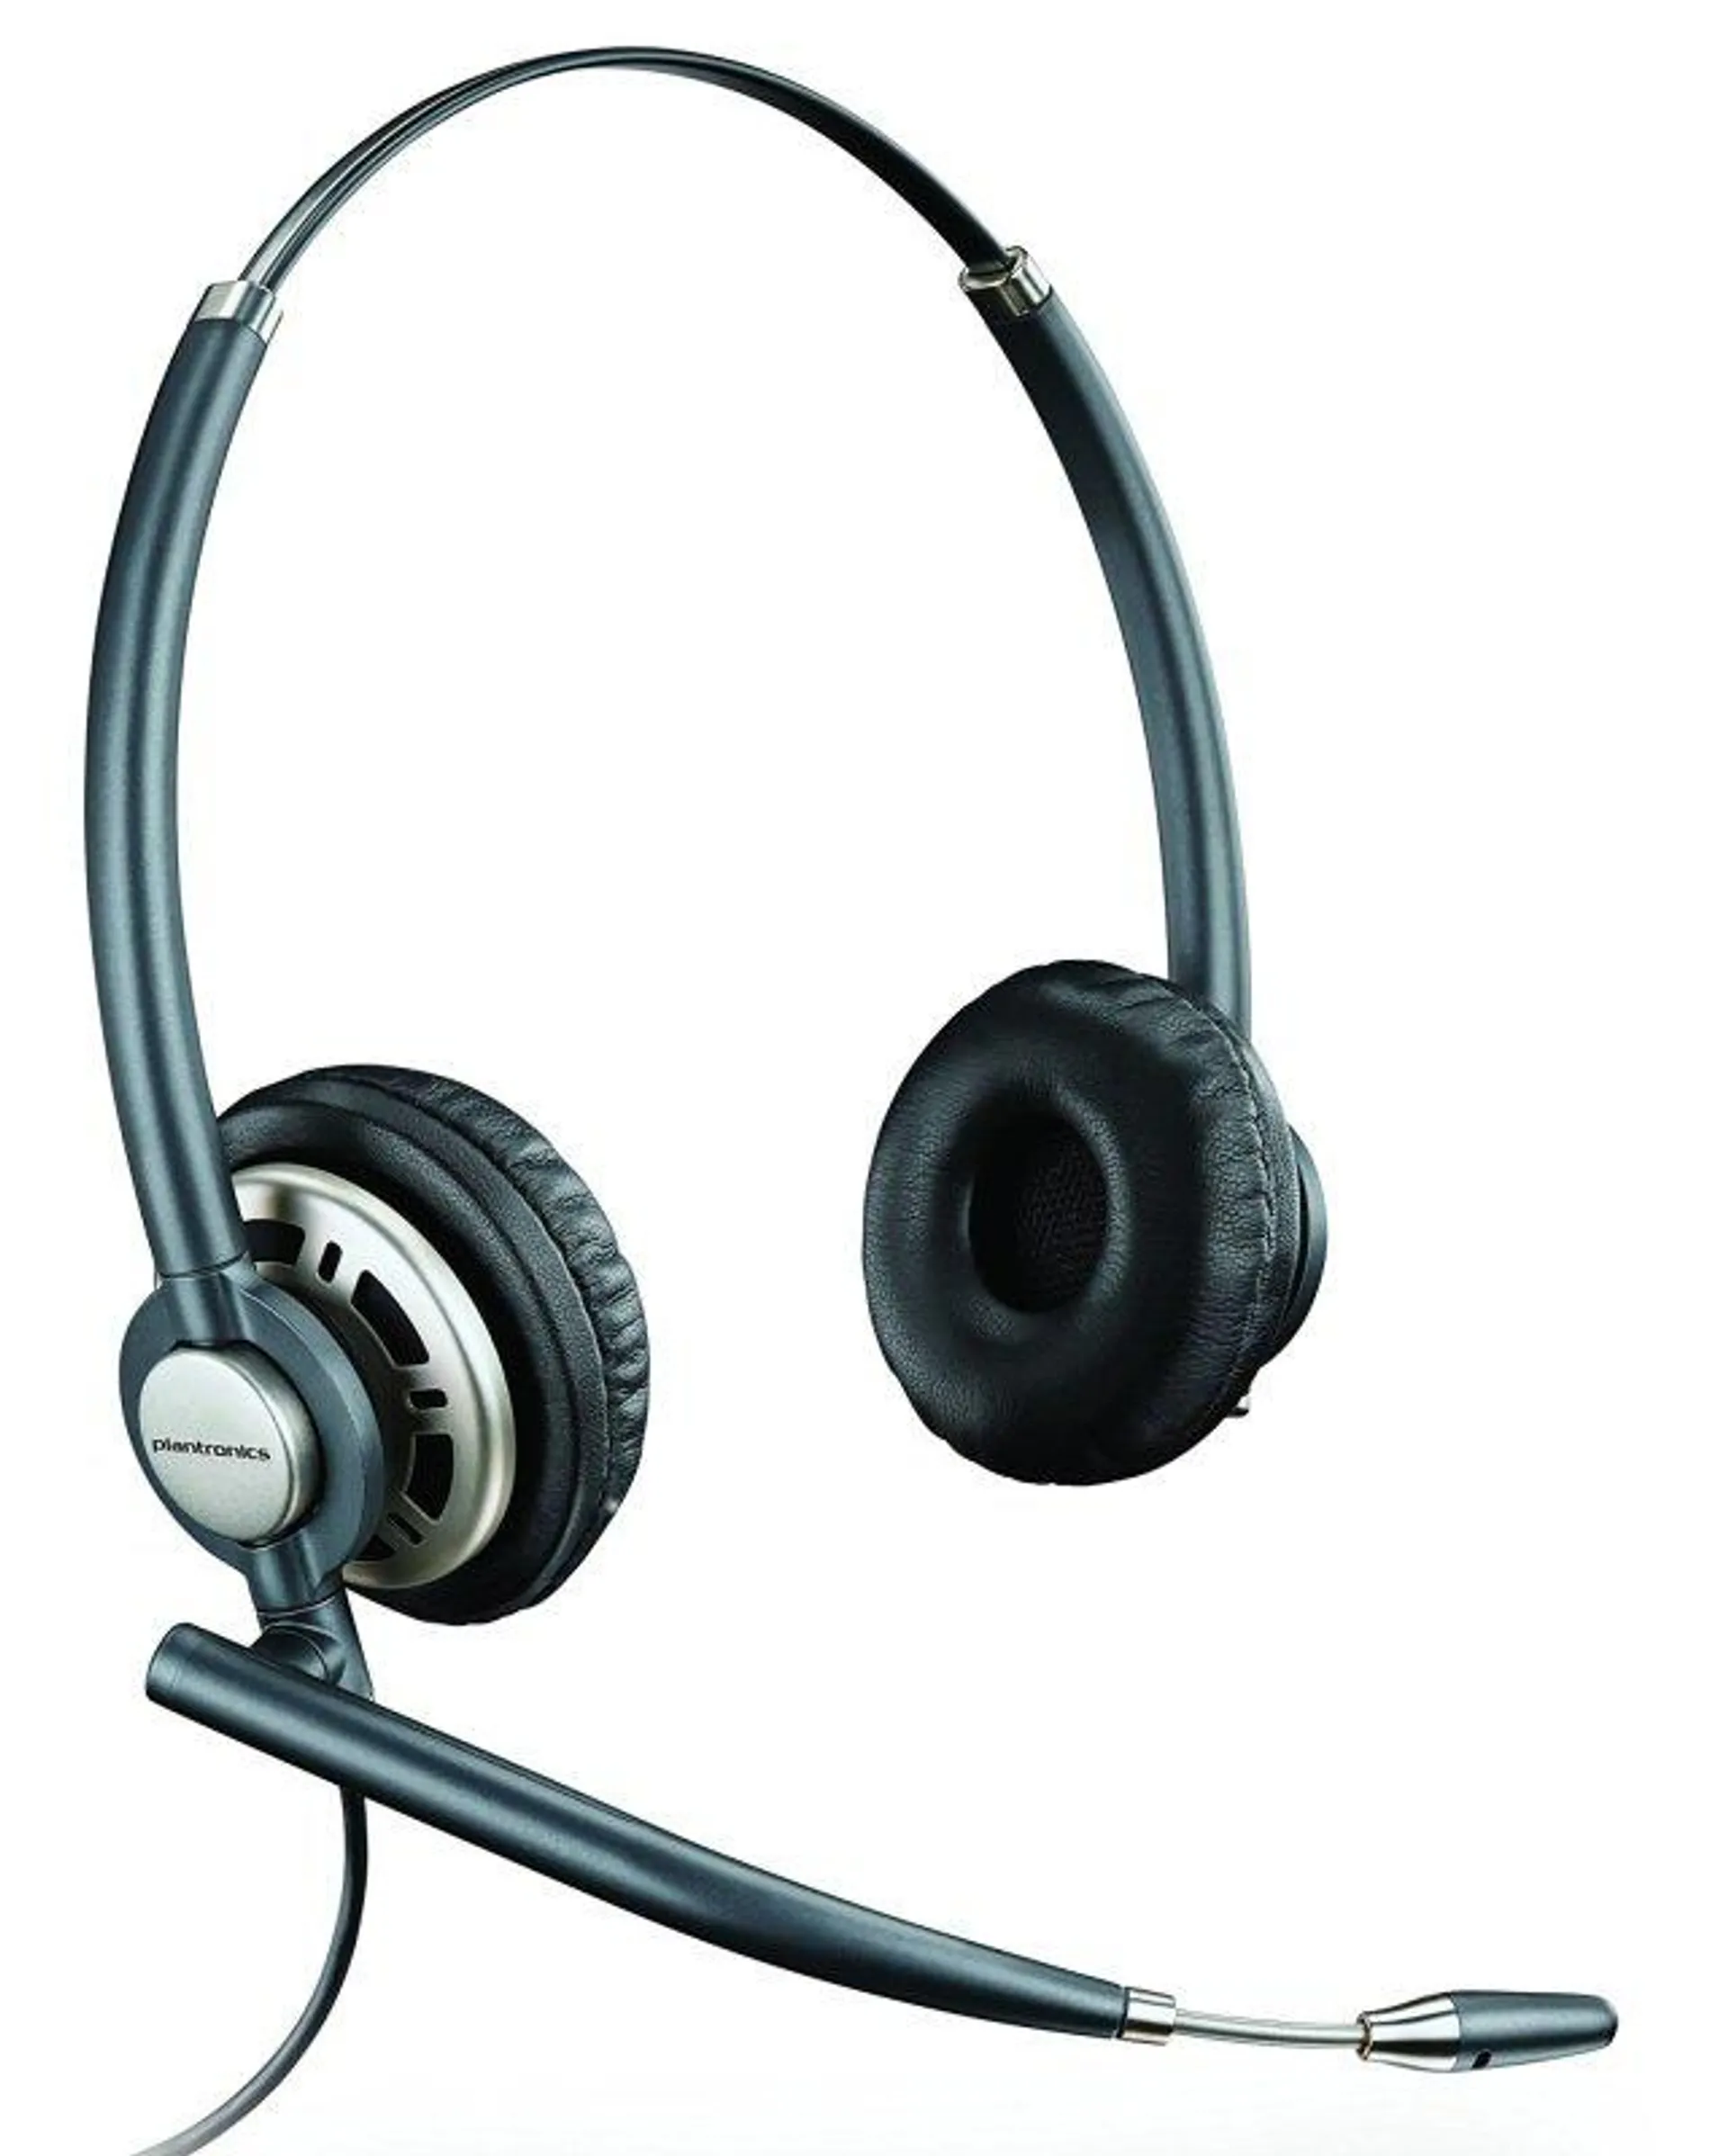 Poly EncorePro HW720 Stereo Quick Disconnect Headset